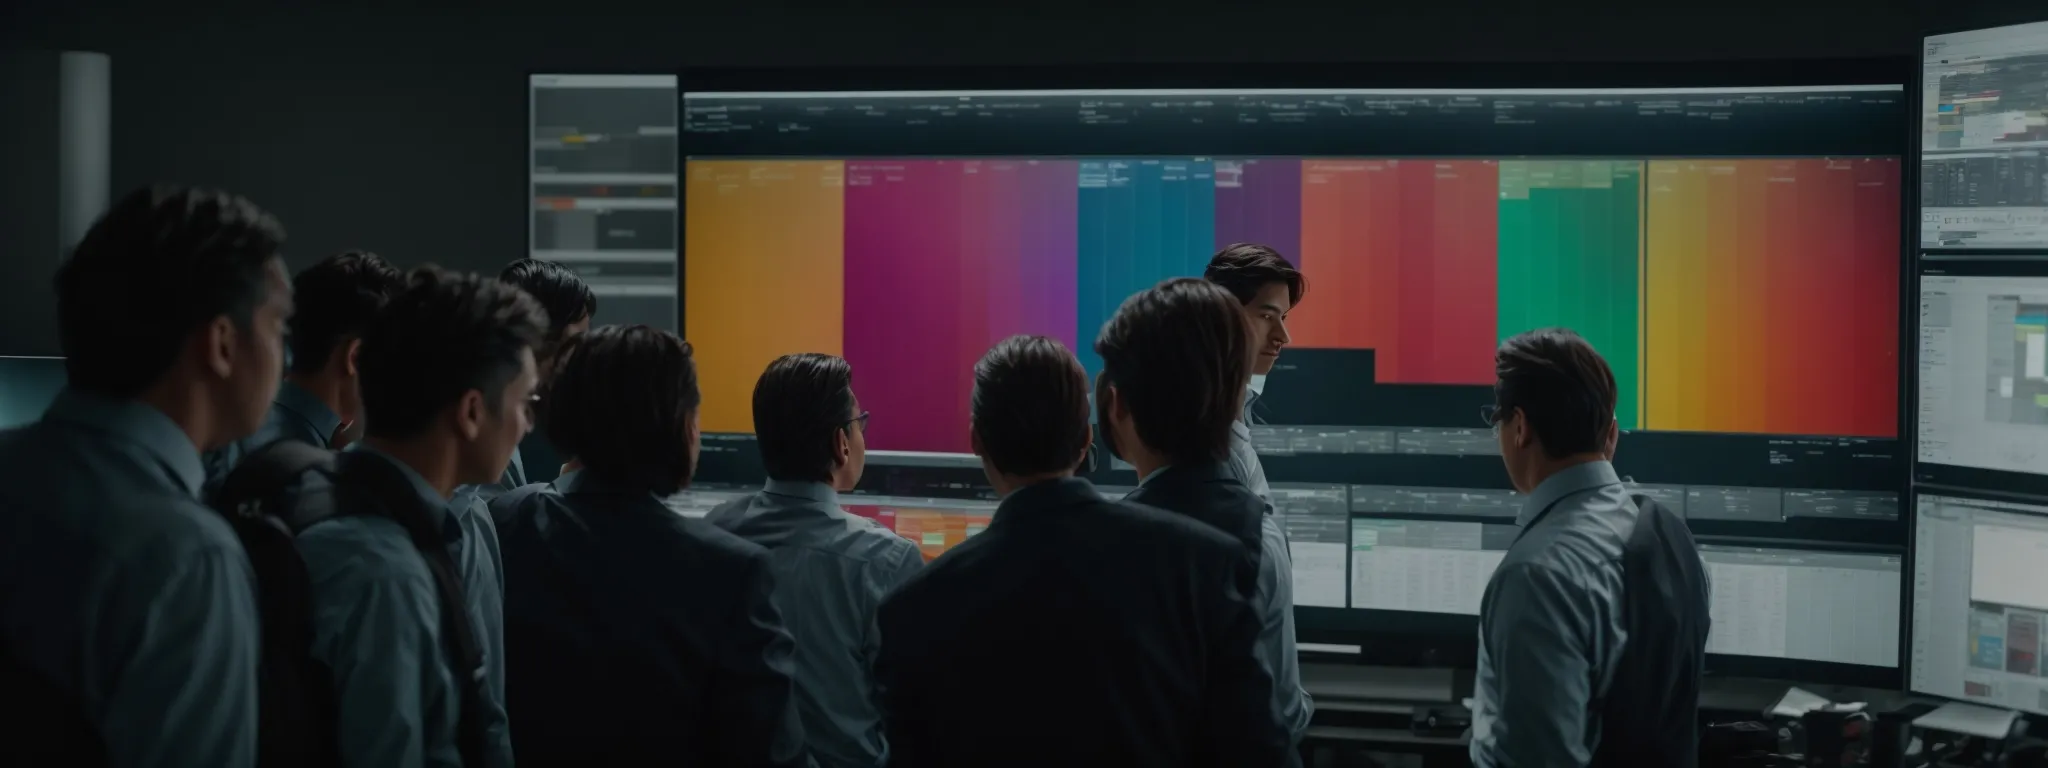 a group of professionals gathered around a large digital screen, reviewing a colorful workflow chart.